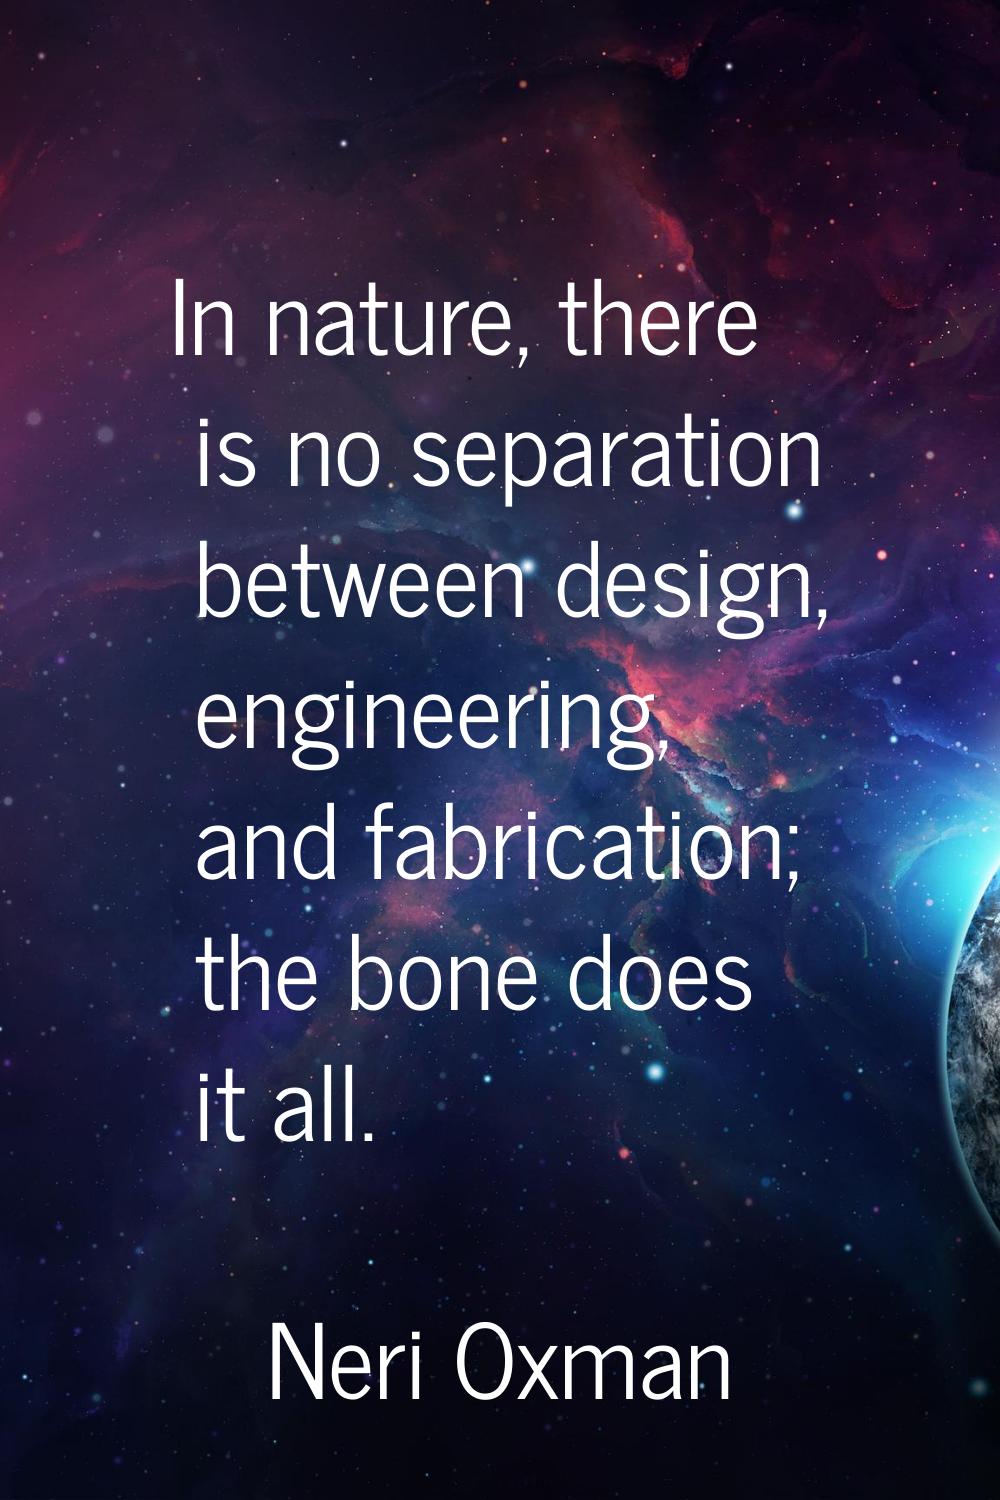 In nature, there is no separation between design, engineering, and fabrication; the bone does it al